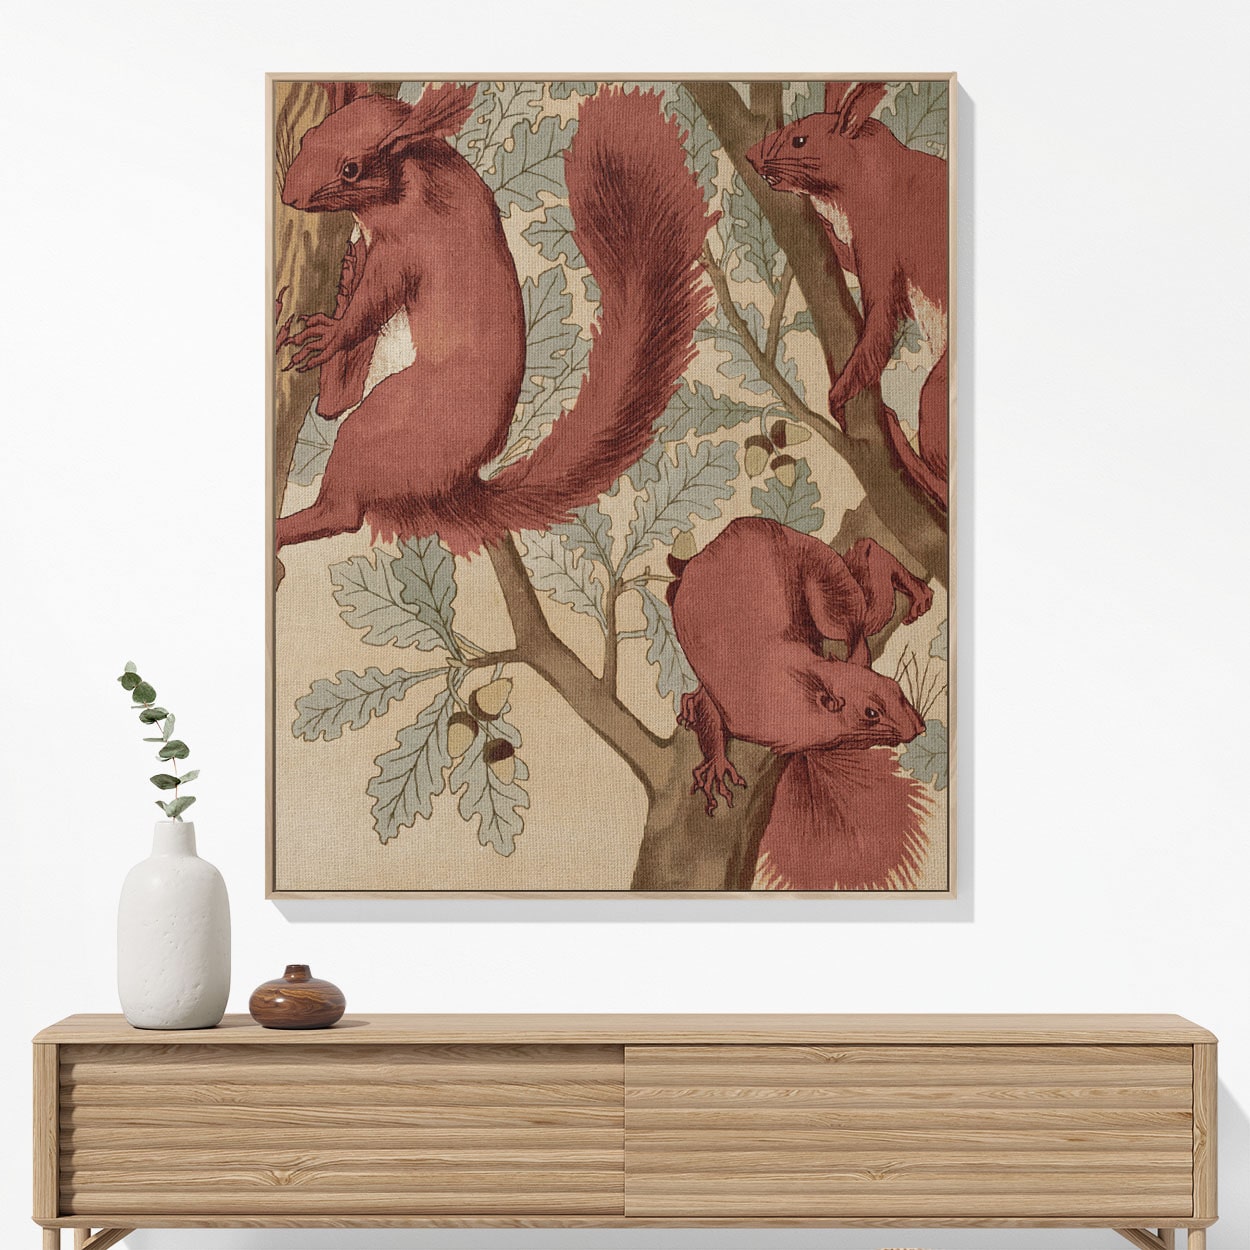 Red Squirrels Woven Blanket Woven Blanket Hanging on a Wall as Framed Wall Art